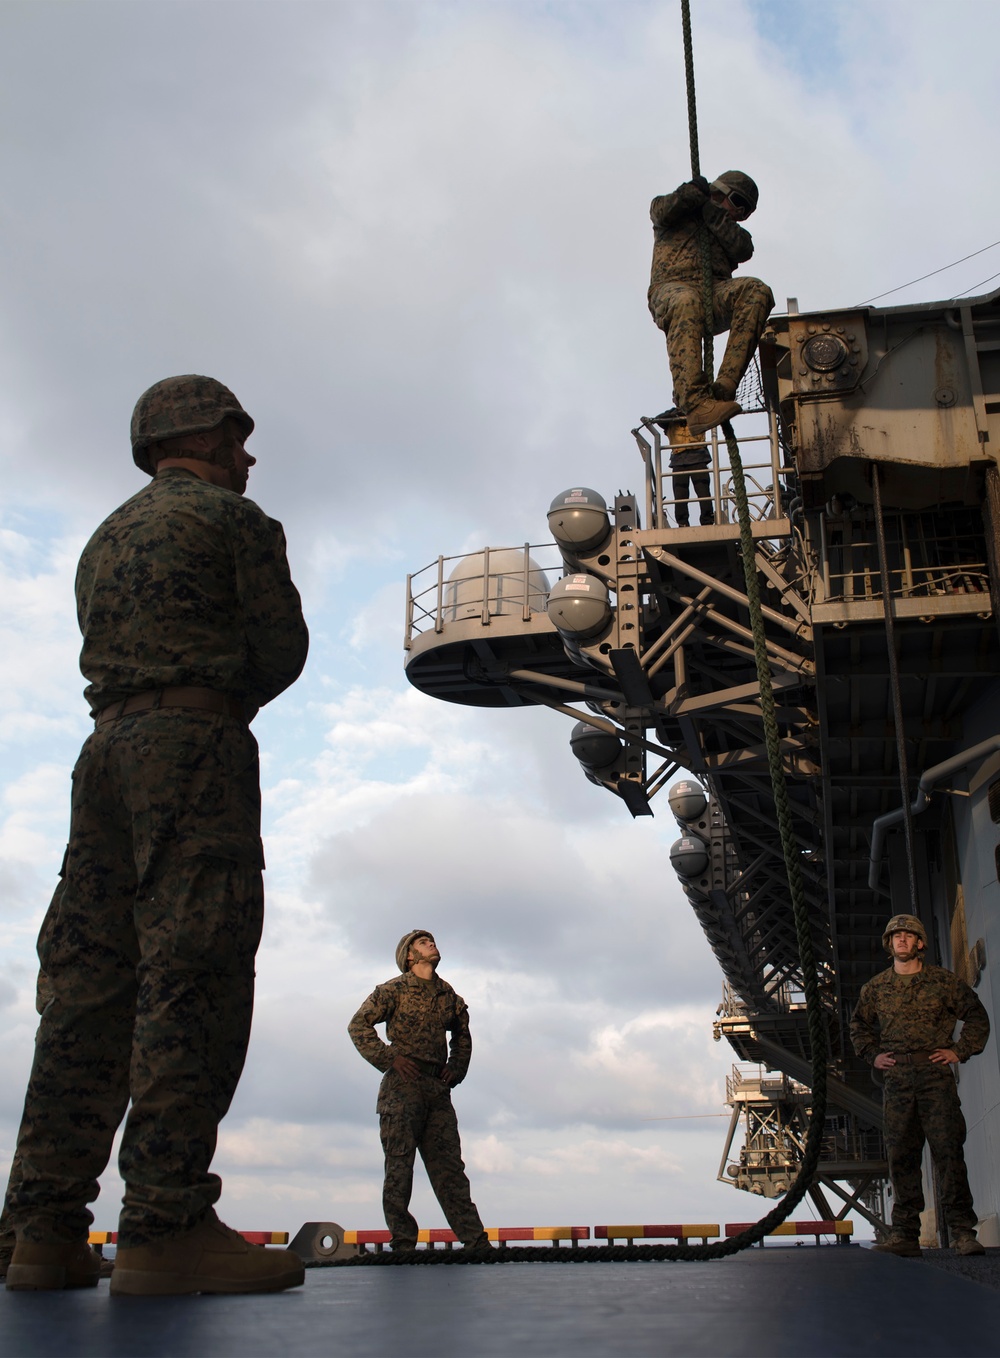 Battalion Landing Team (BLT) 2/5 Marines Conduct Fast Rope Exercise Aboard USS Bonhomme Richard (LHD 6)